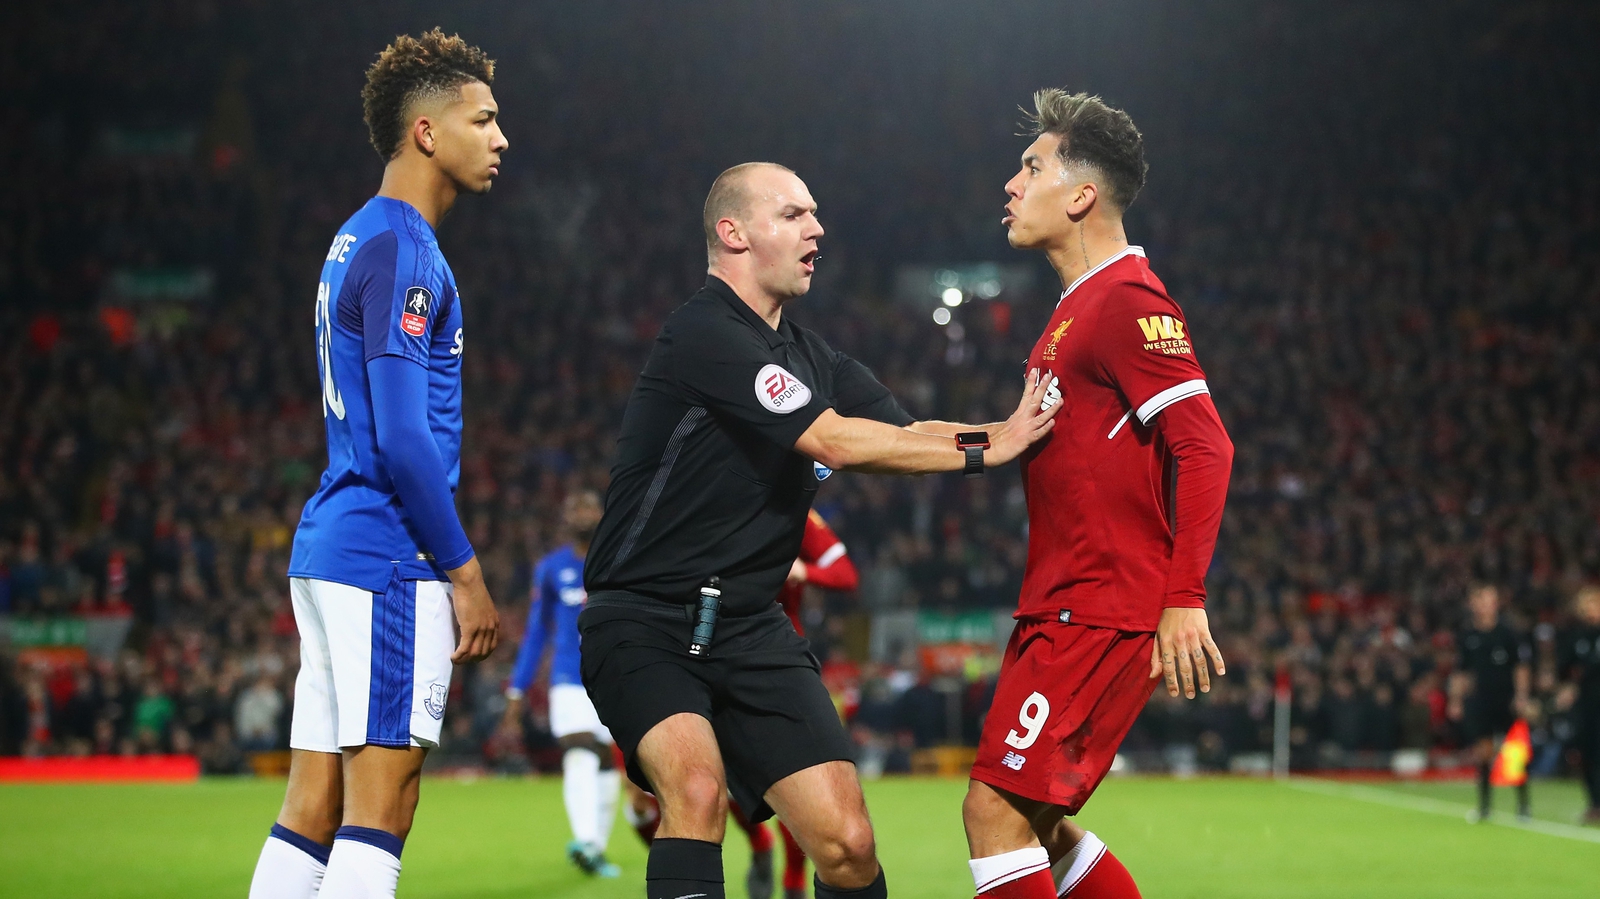 Merseyside flashpoint included in referee's report